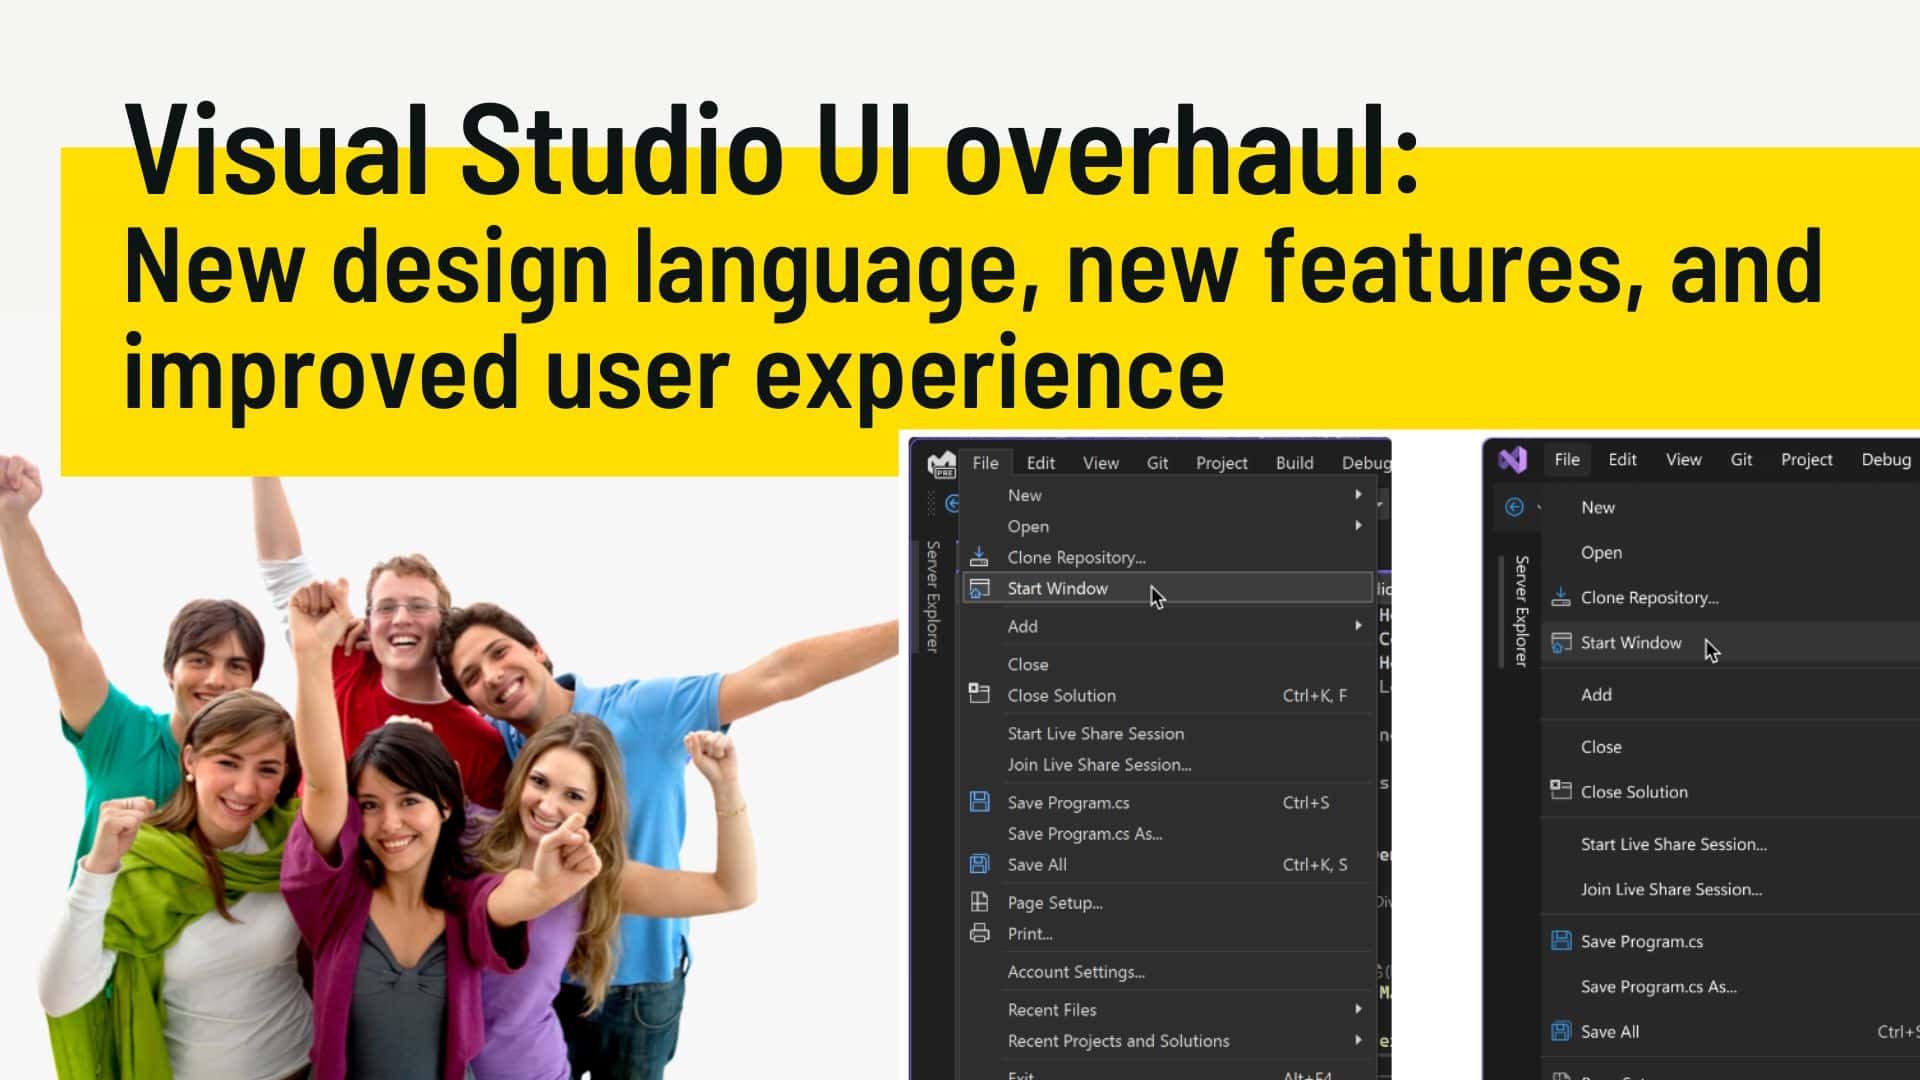 Visual Studio's new UI updates focus on accessibility, productivity, and cohesiveness